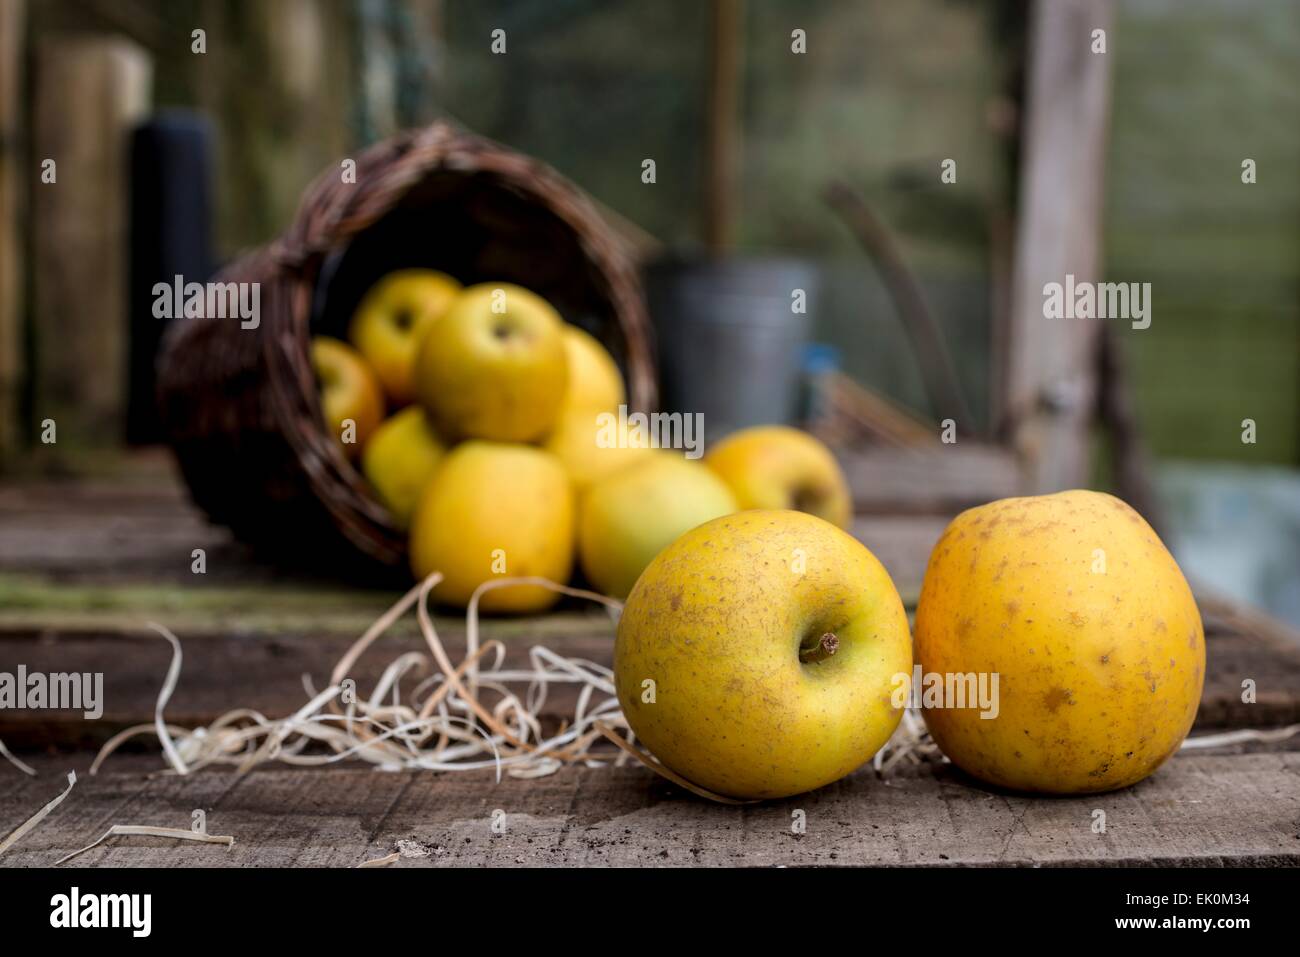 nobody, no one, no-one, healthy eating, fresh, food, food and drink, produce, fruit, still life, medium group of objects, apples, goldrush apples, basket, fallen Stock Photo